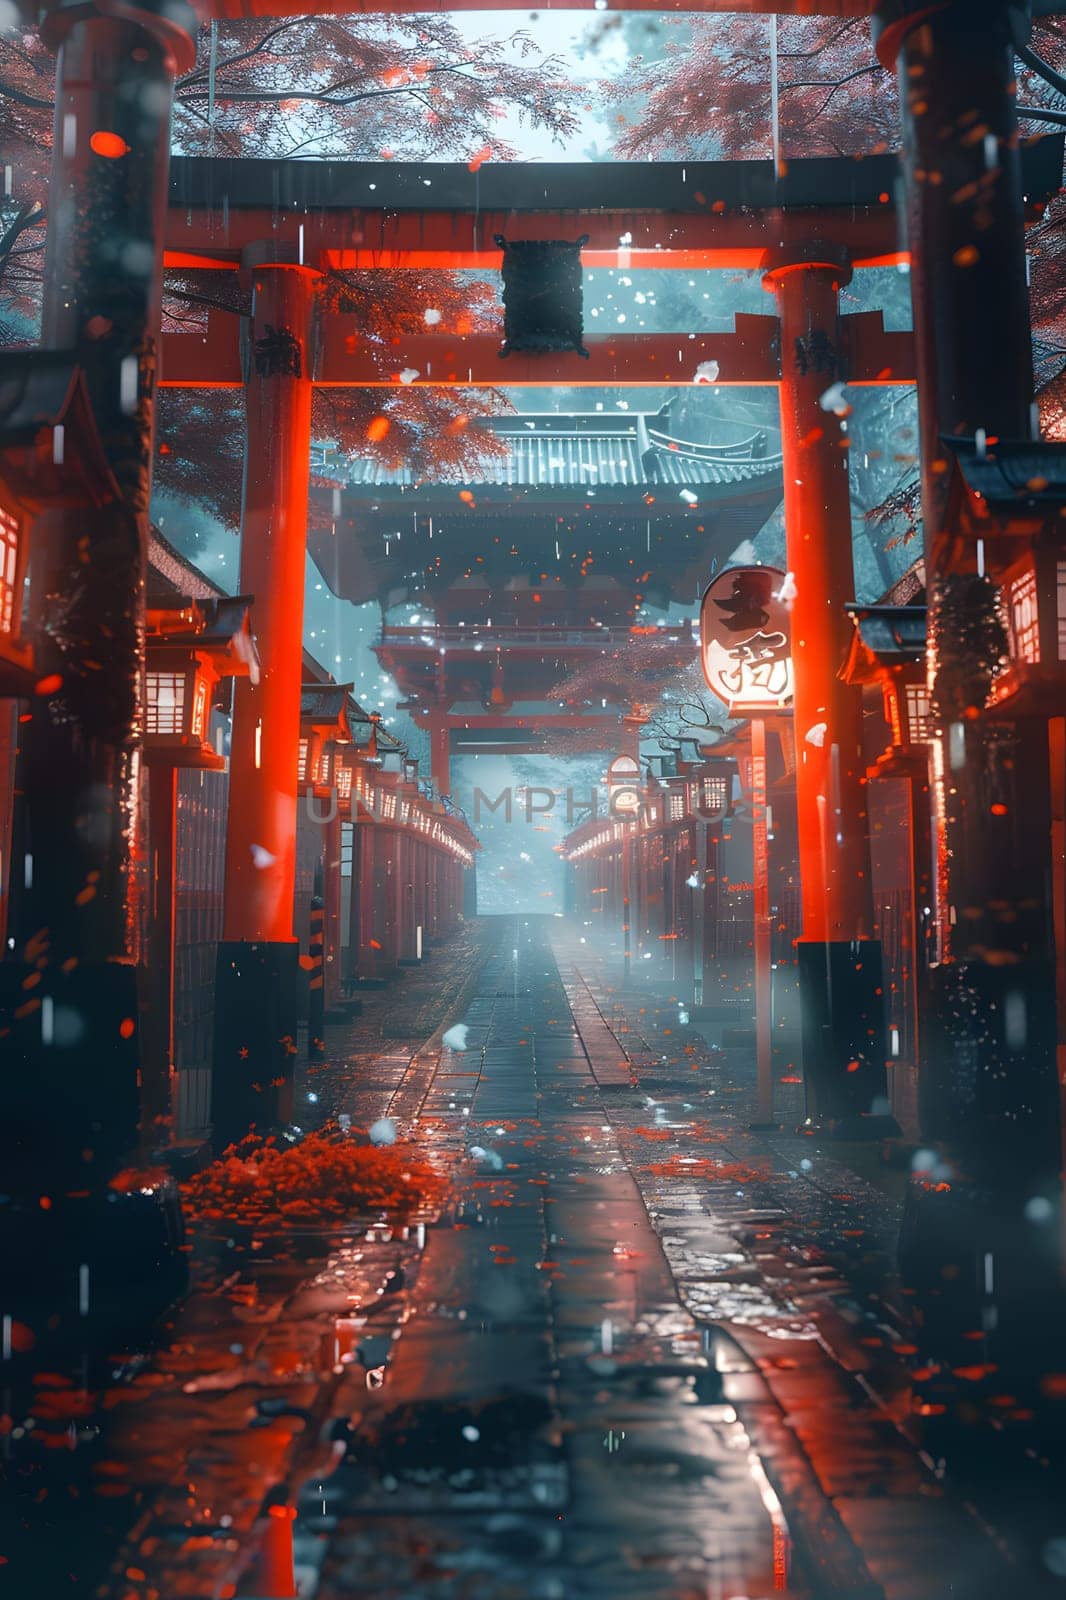 In the middle of a dark alleyway, a torii gate stands tall, illuminated by automotive lighting. The electric blue sky reflects off the gate, creating a symmetrical and eerie scene in the city